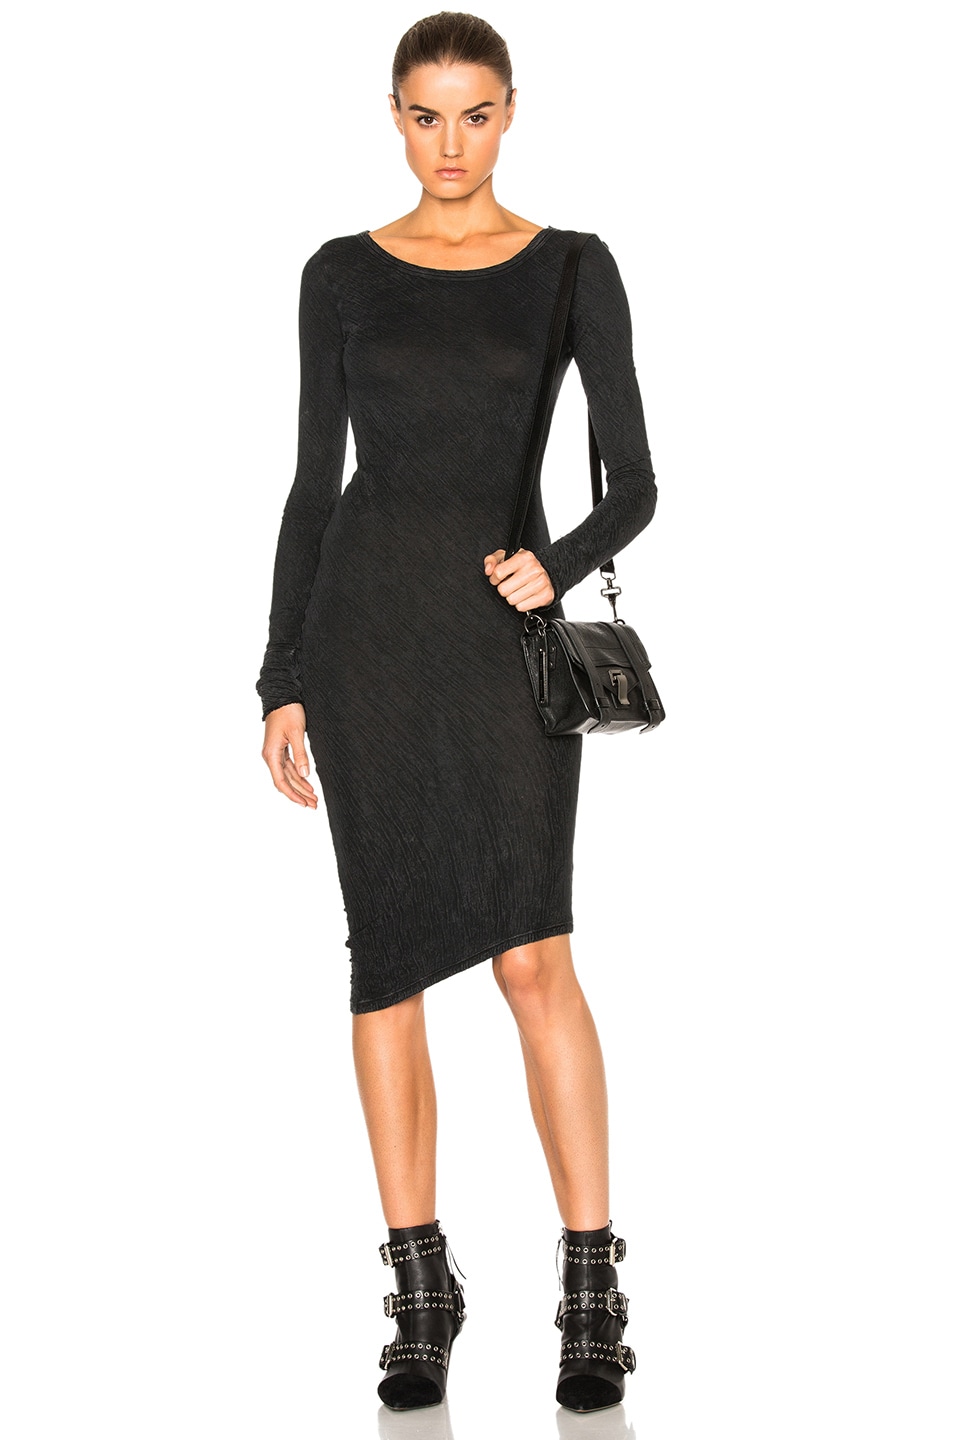 Image 1 of Fine by Superfine Snug Dress in Black Mineral